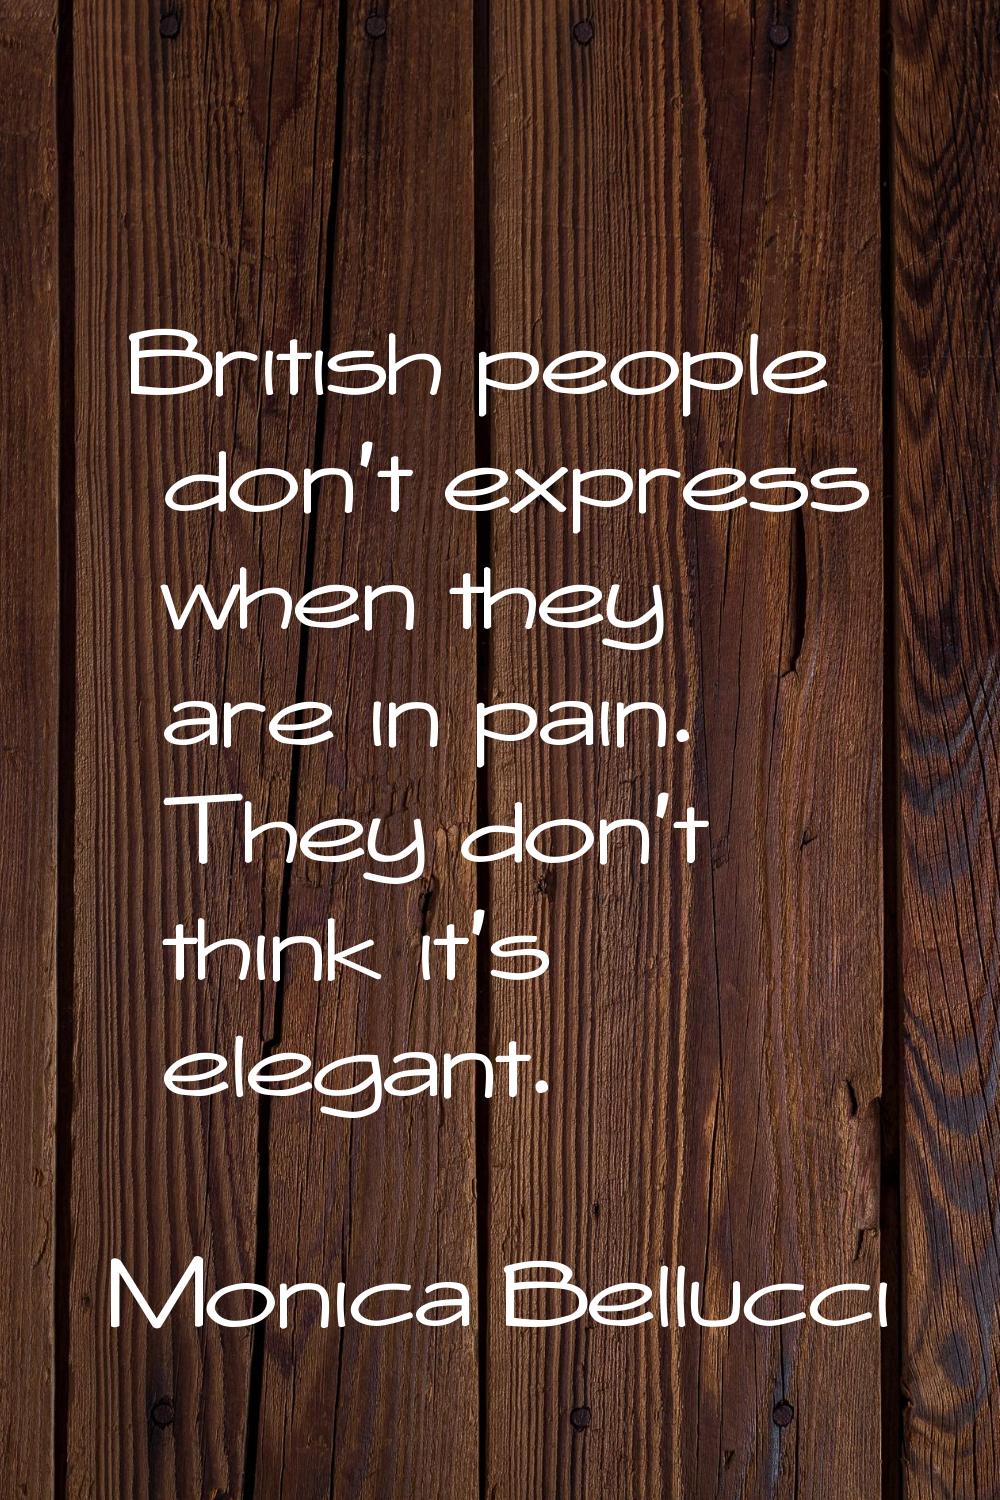 British people don't express when they are in pain. They don't think it's elegant.